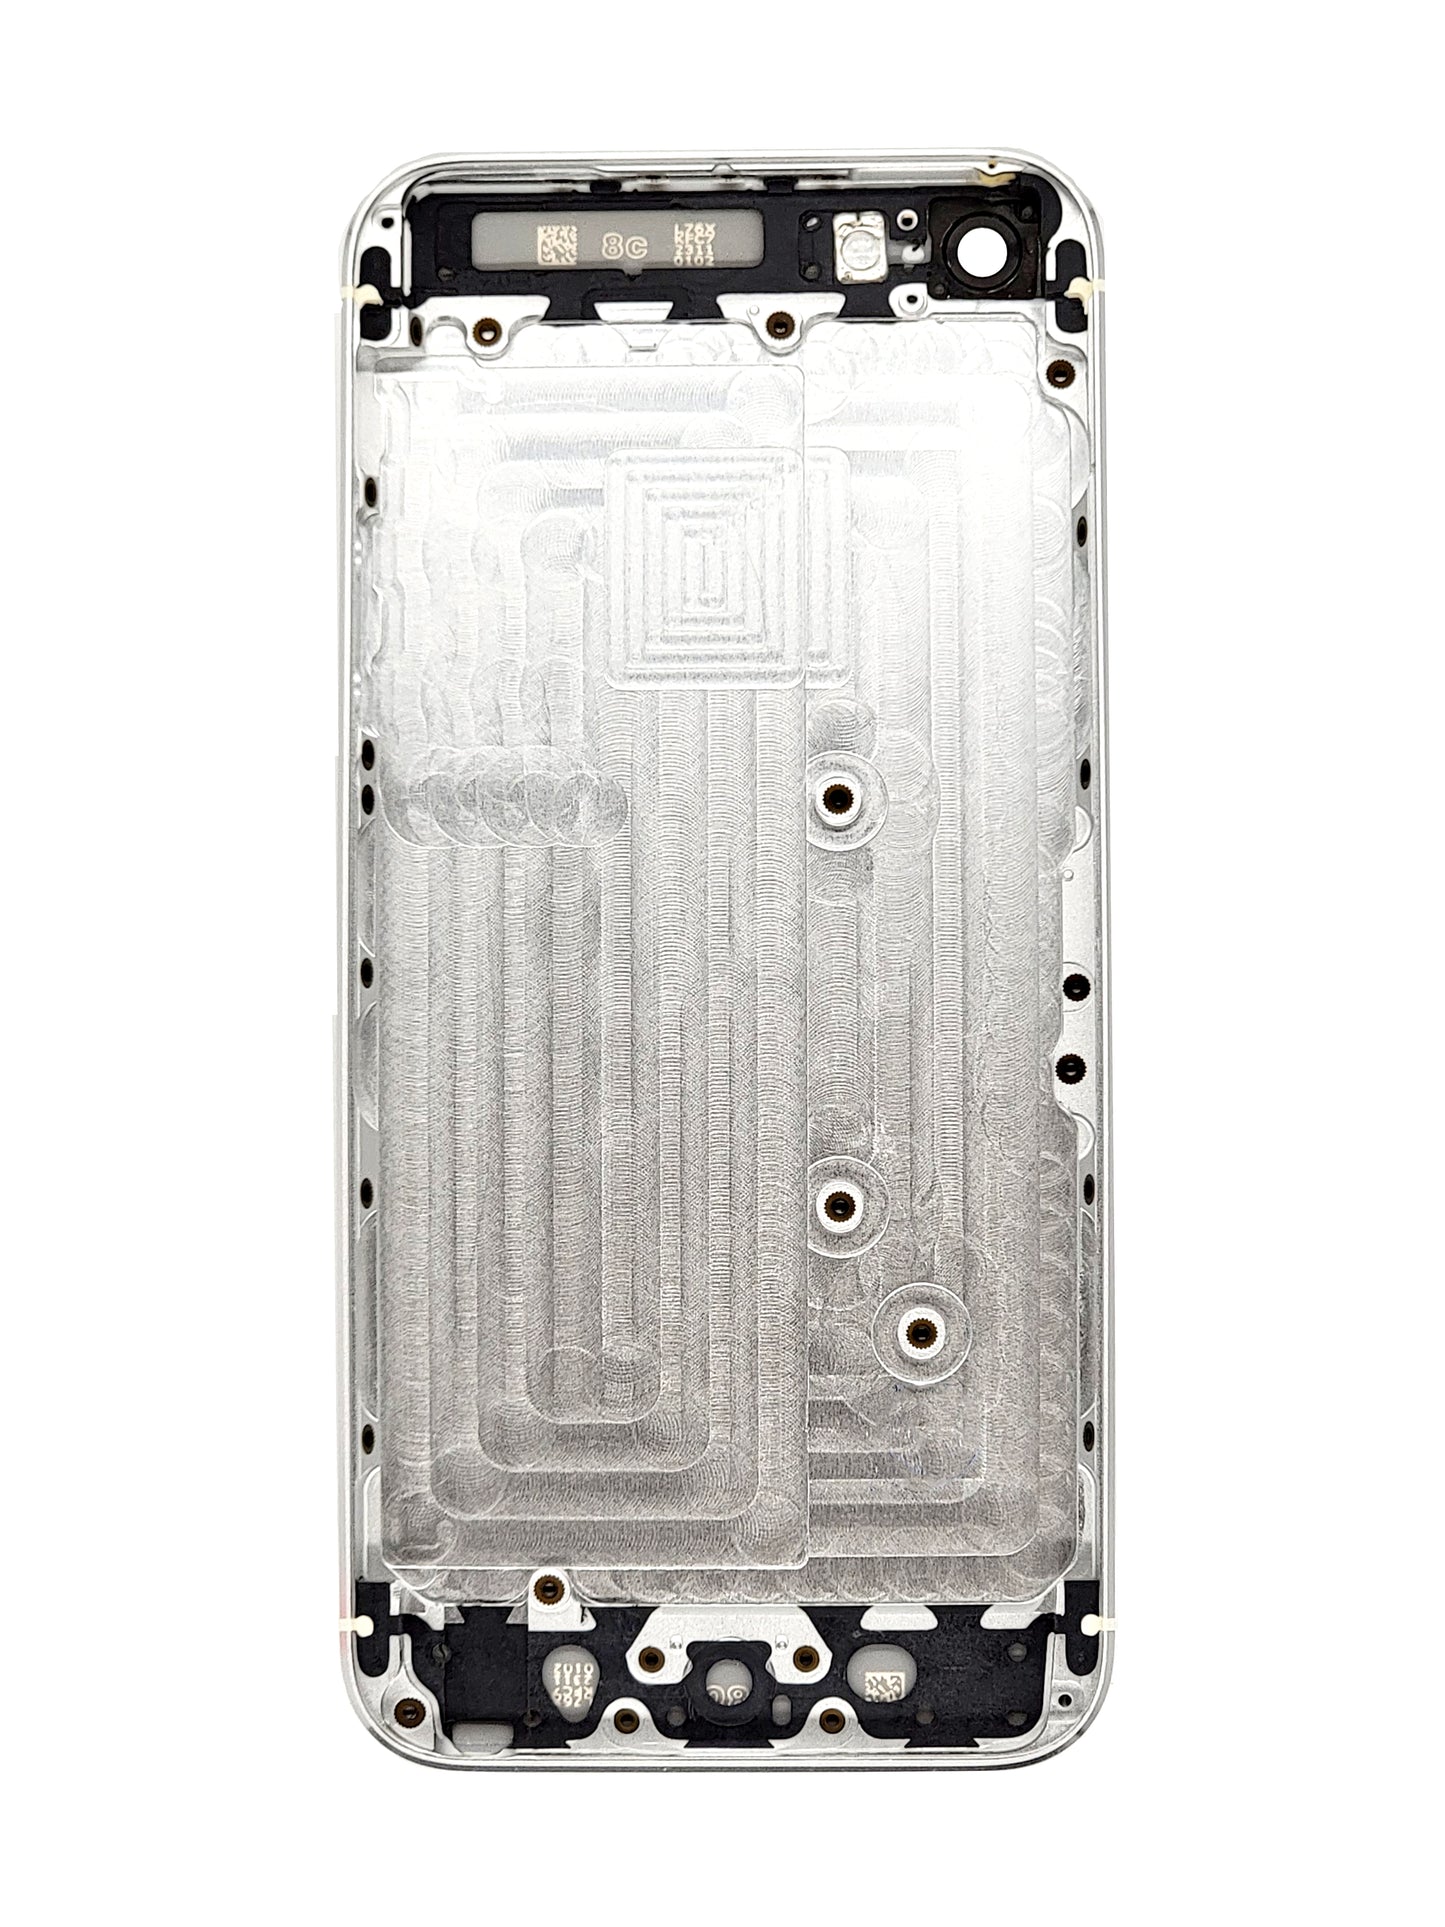 iPhone 5 Housing (Silver)